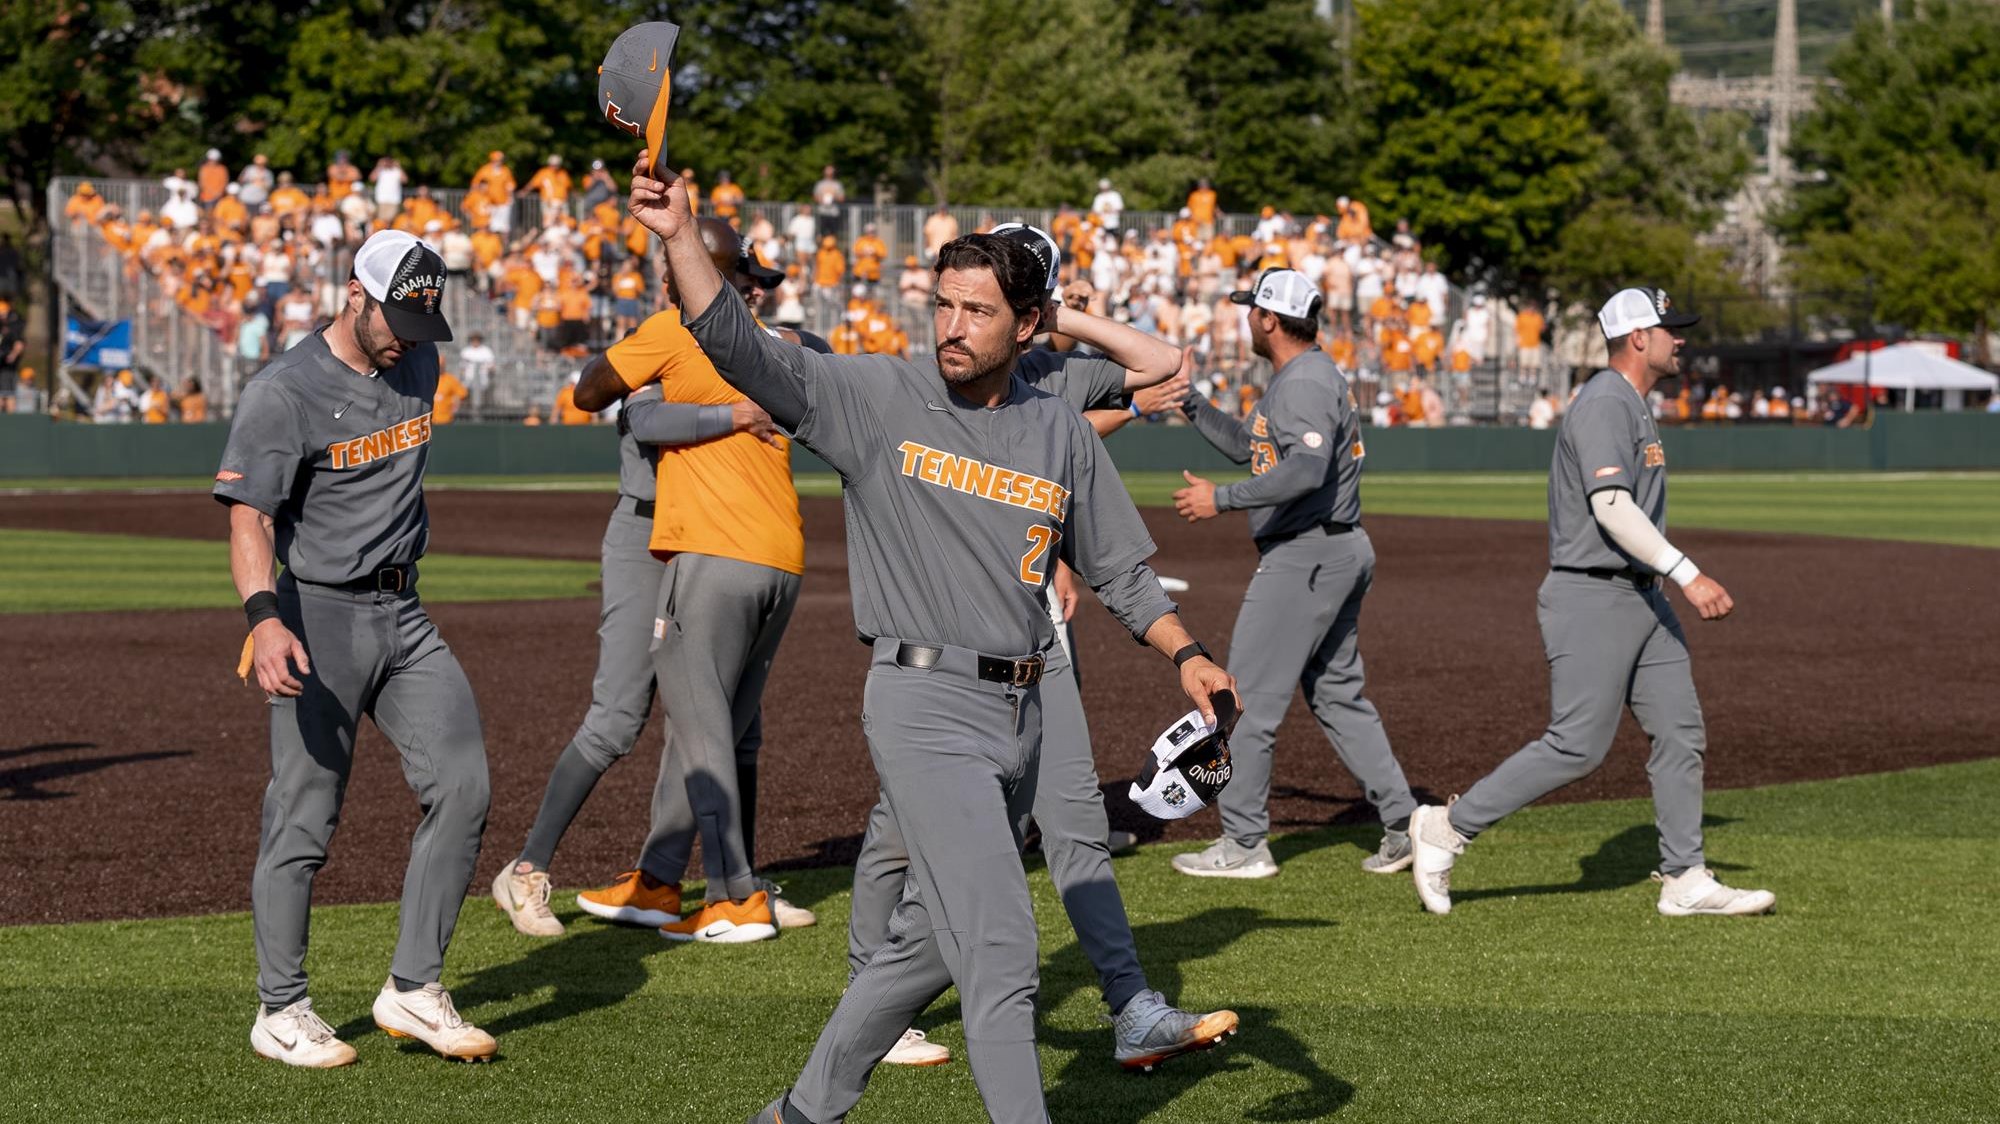 Featured image for “Double play baseball in Knoxville makes sense”